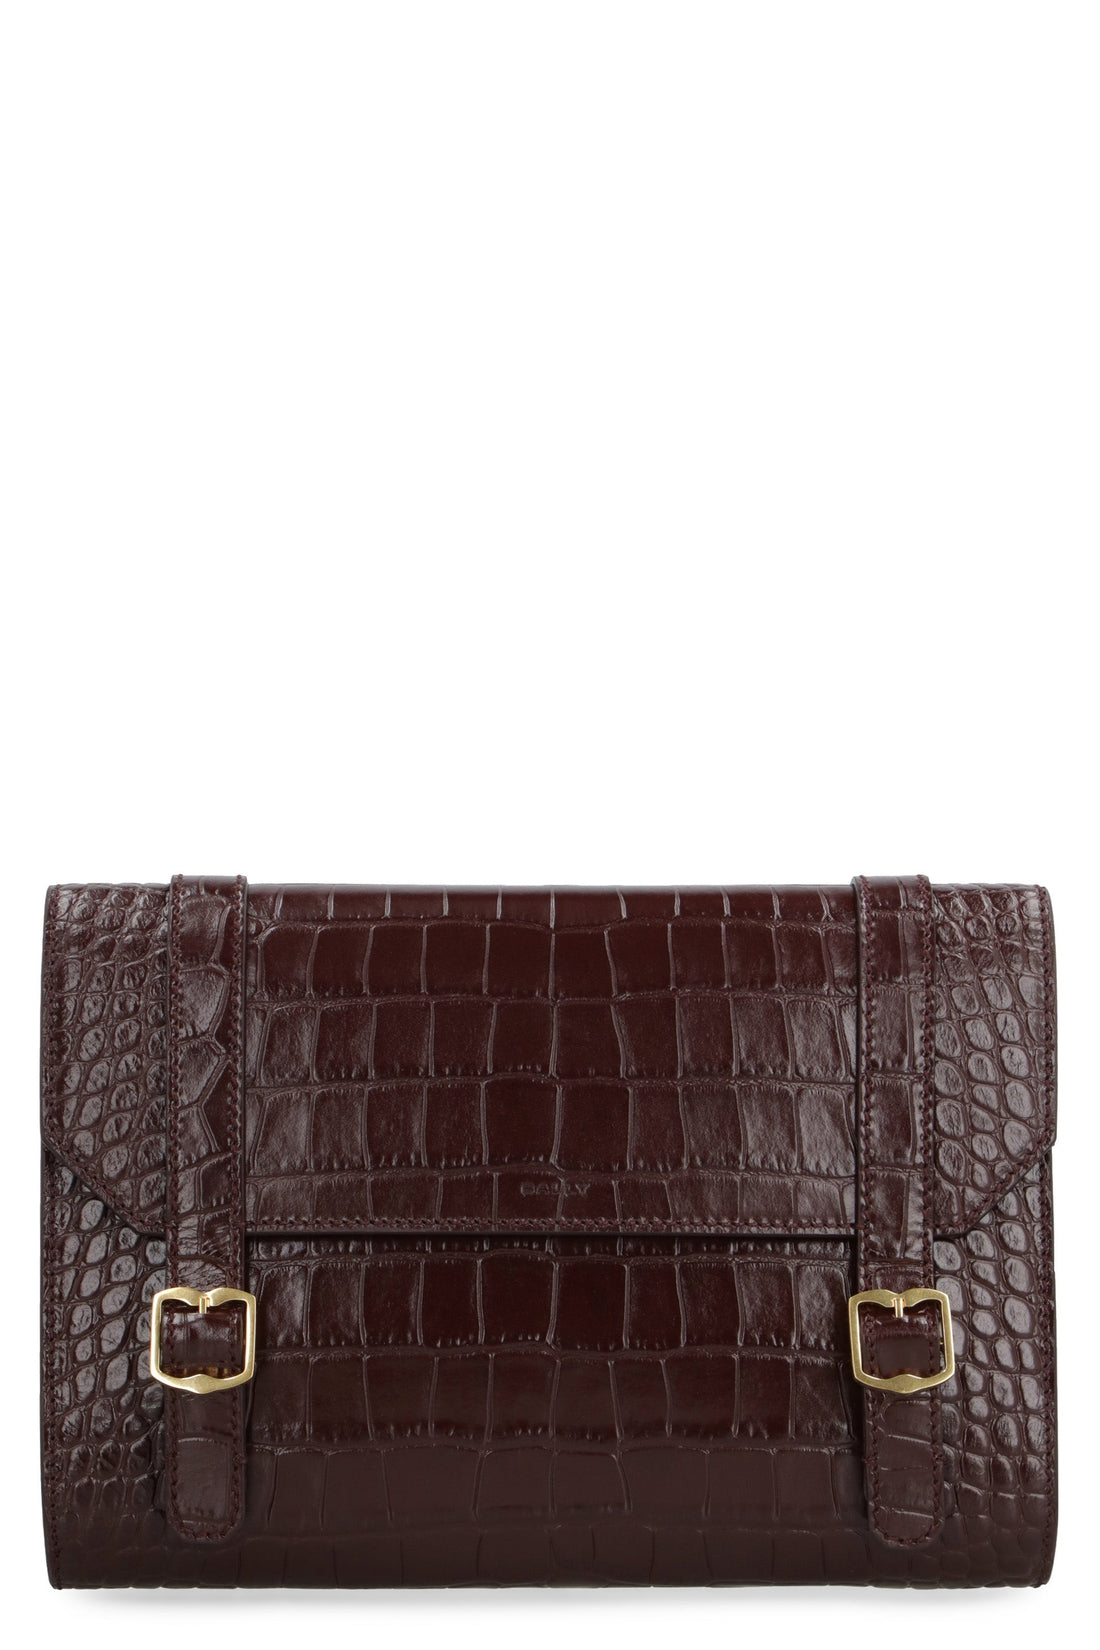 Bally-OUTLET-SALE-Printed leather clutch-ARCHIVIST